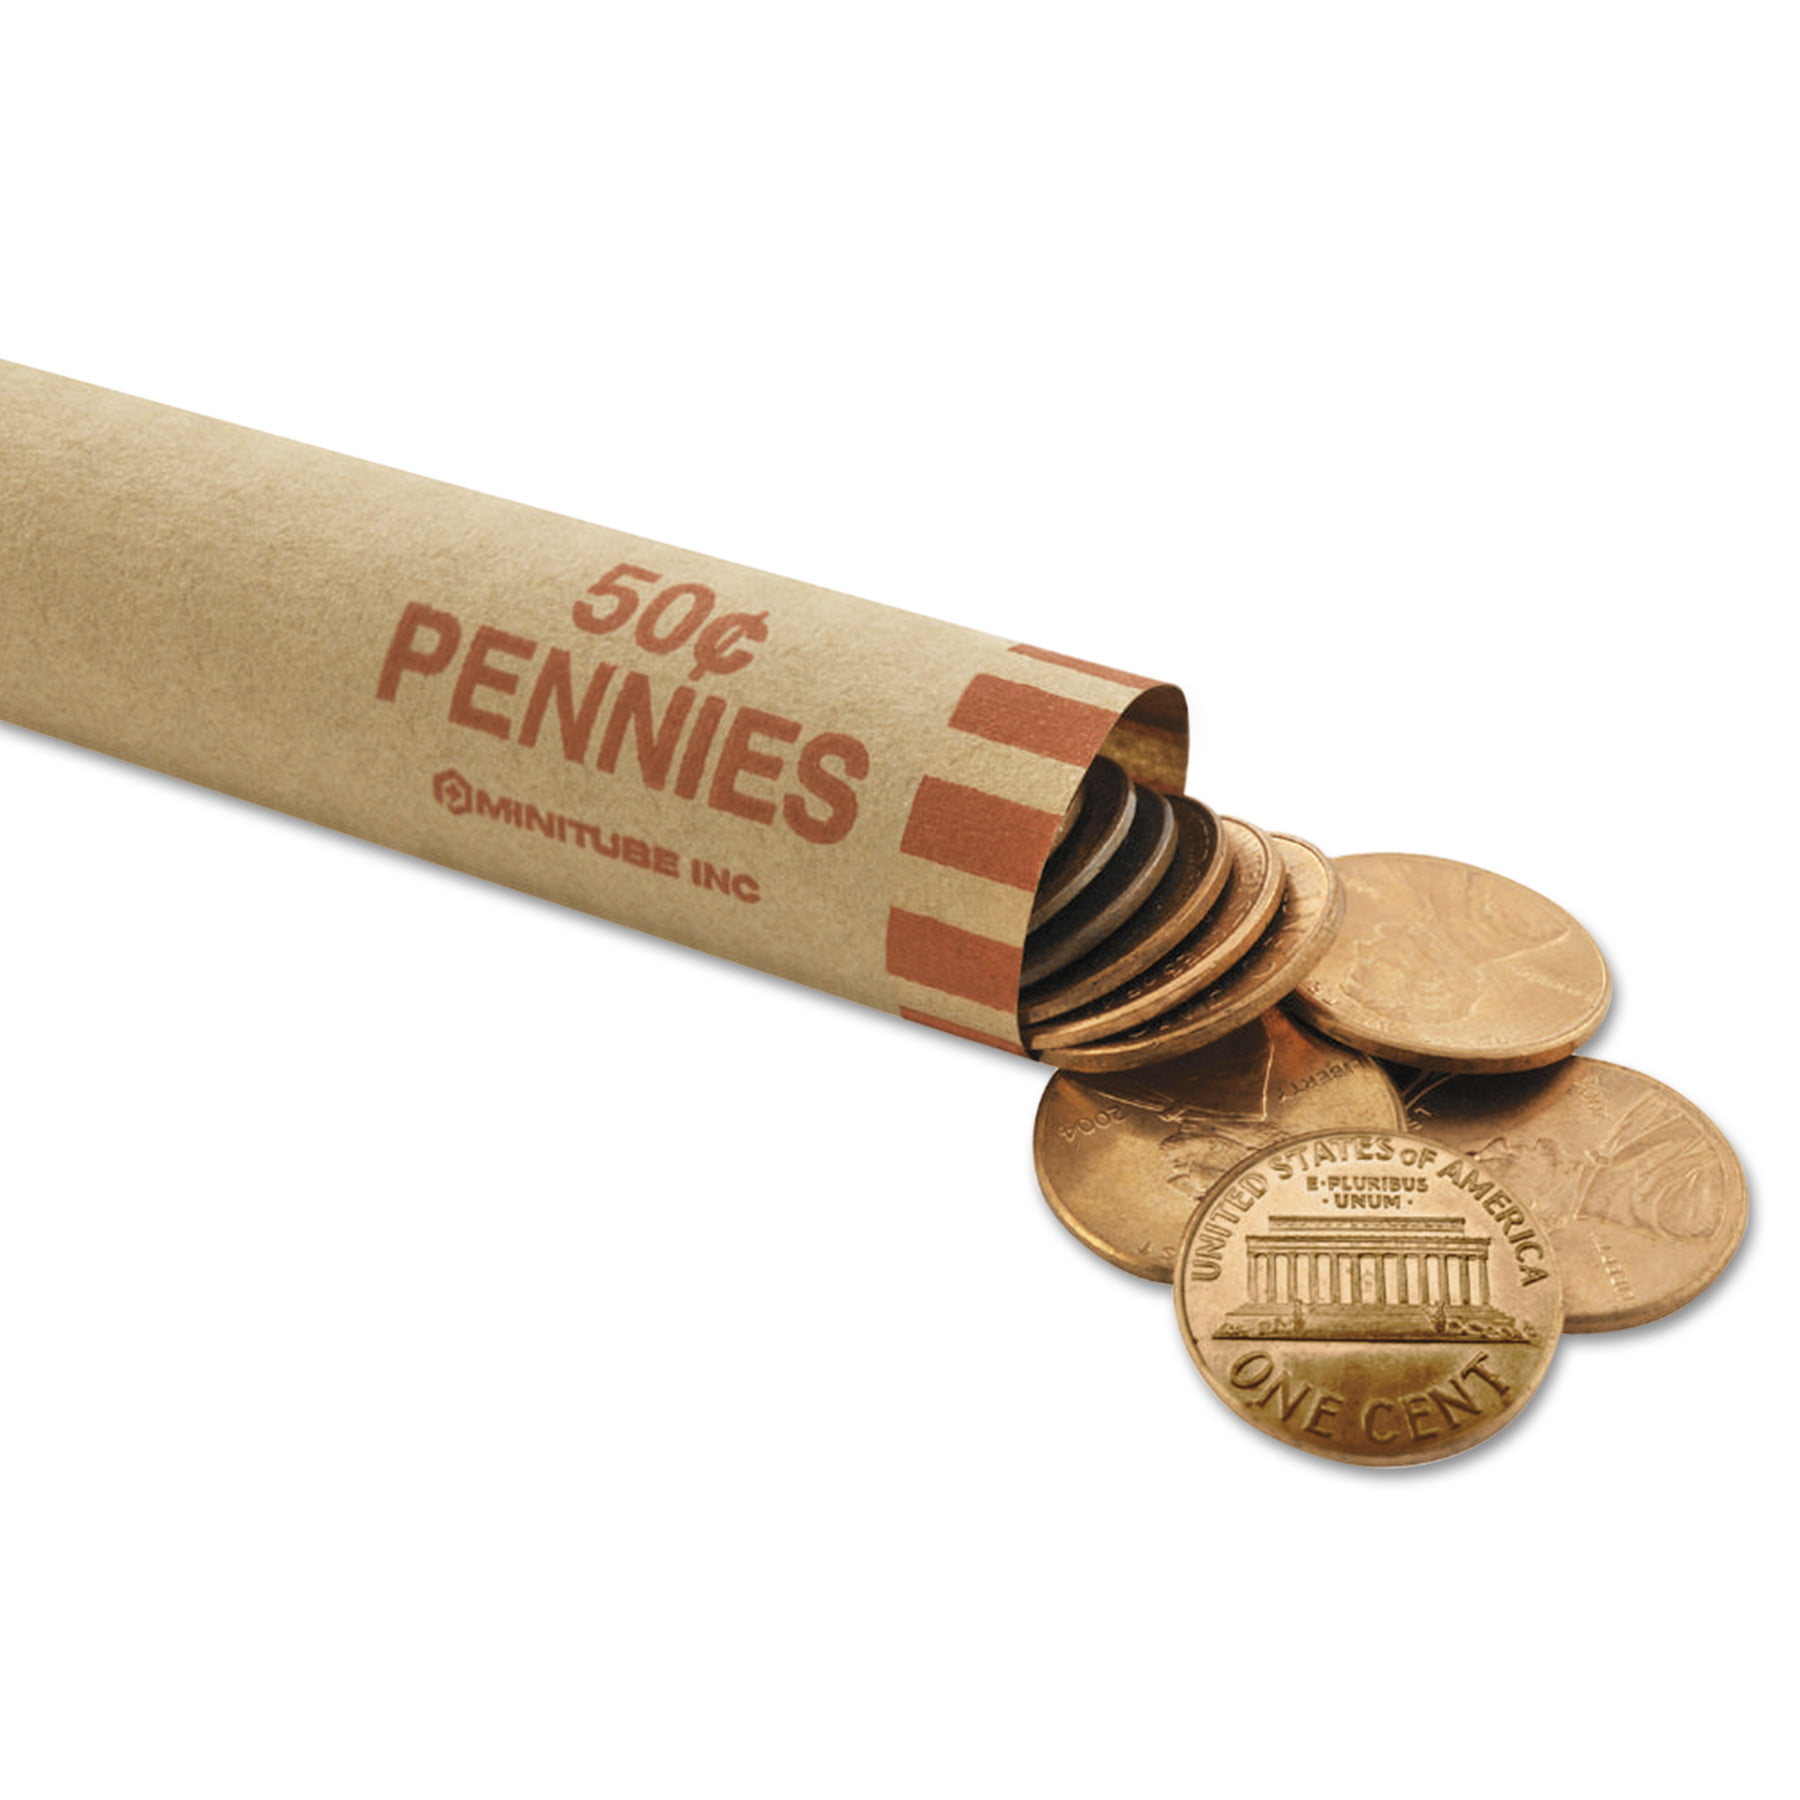 mmf-industries-nested-preformed-coin-wrappers-pennies-50-red-1000